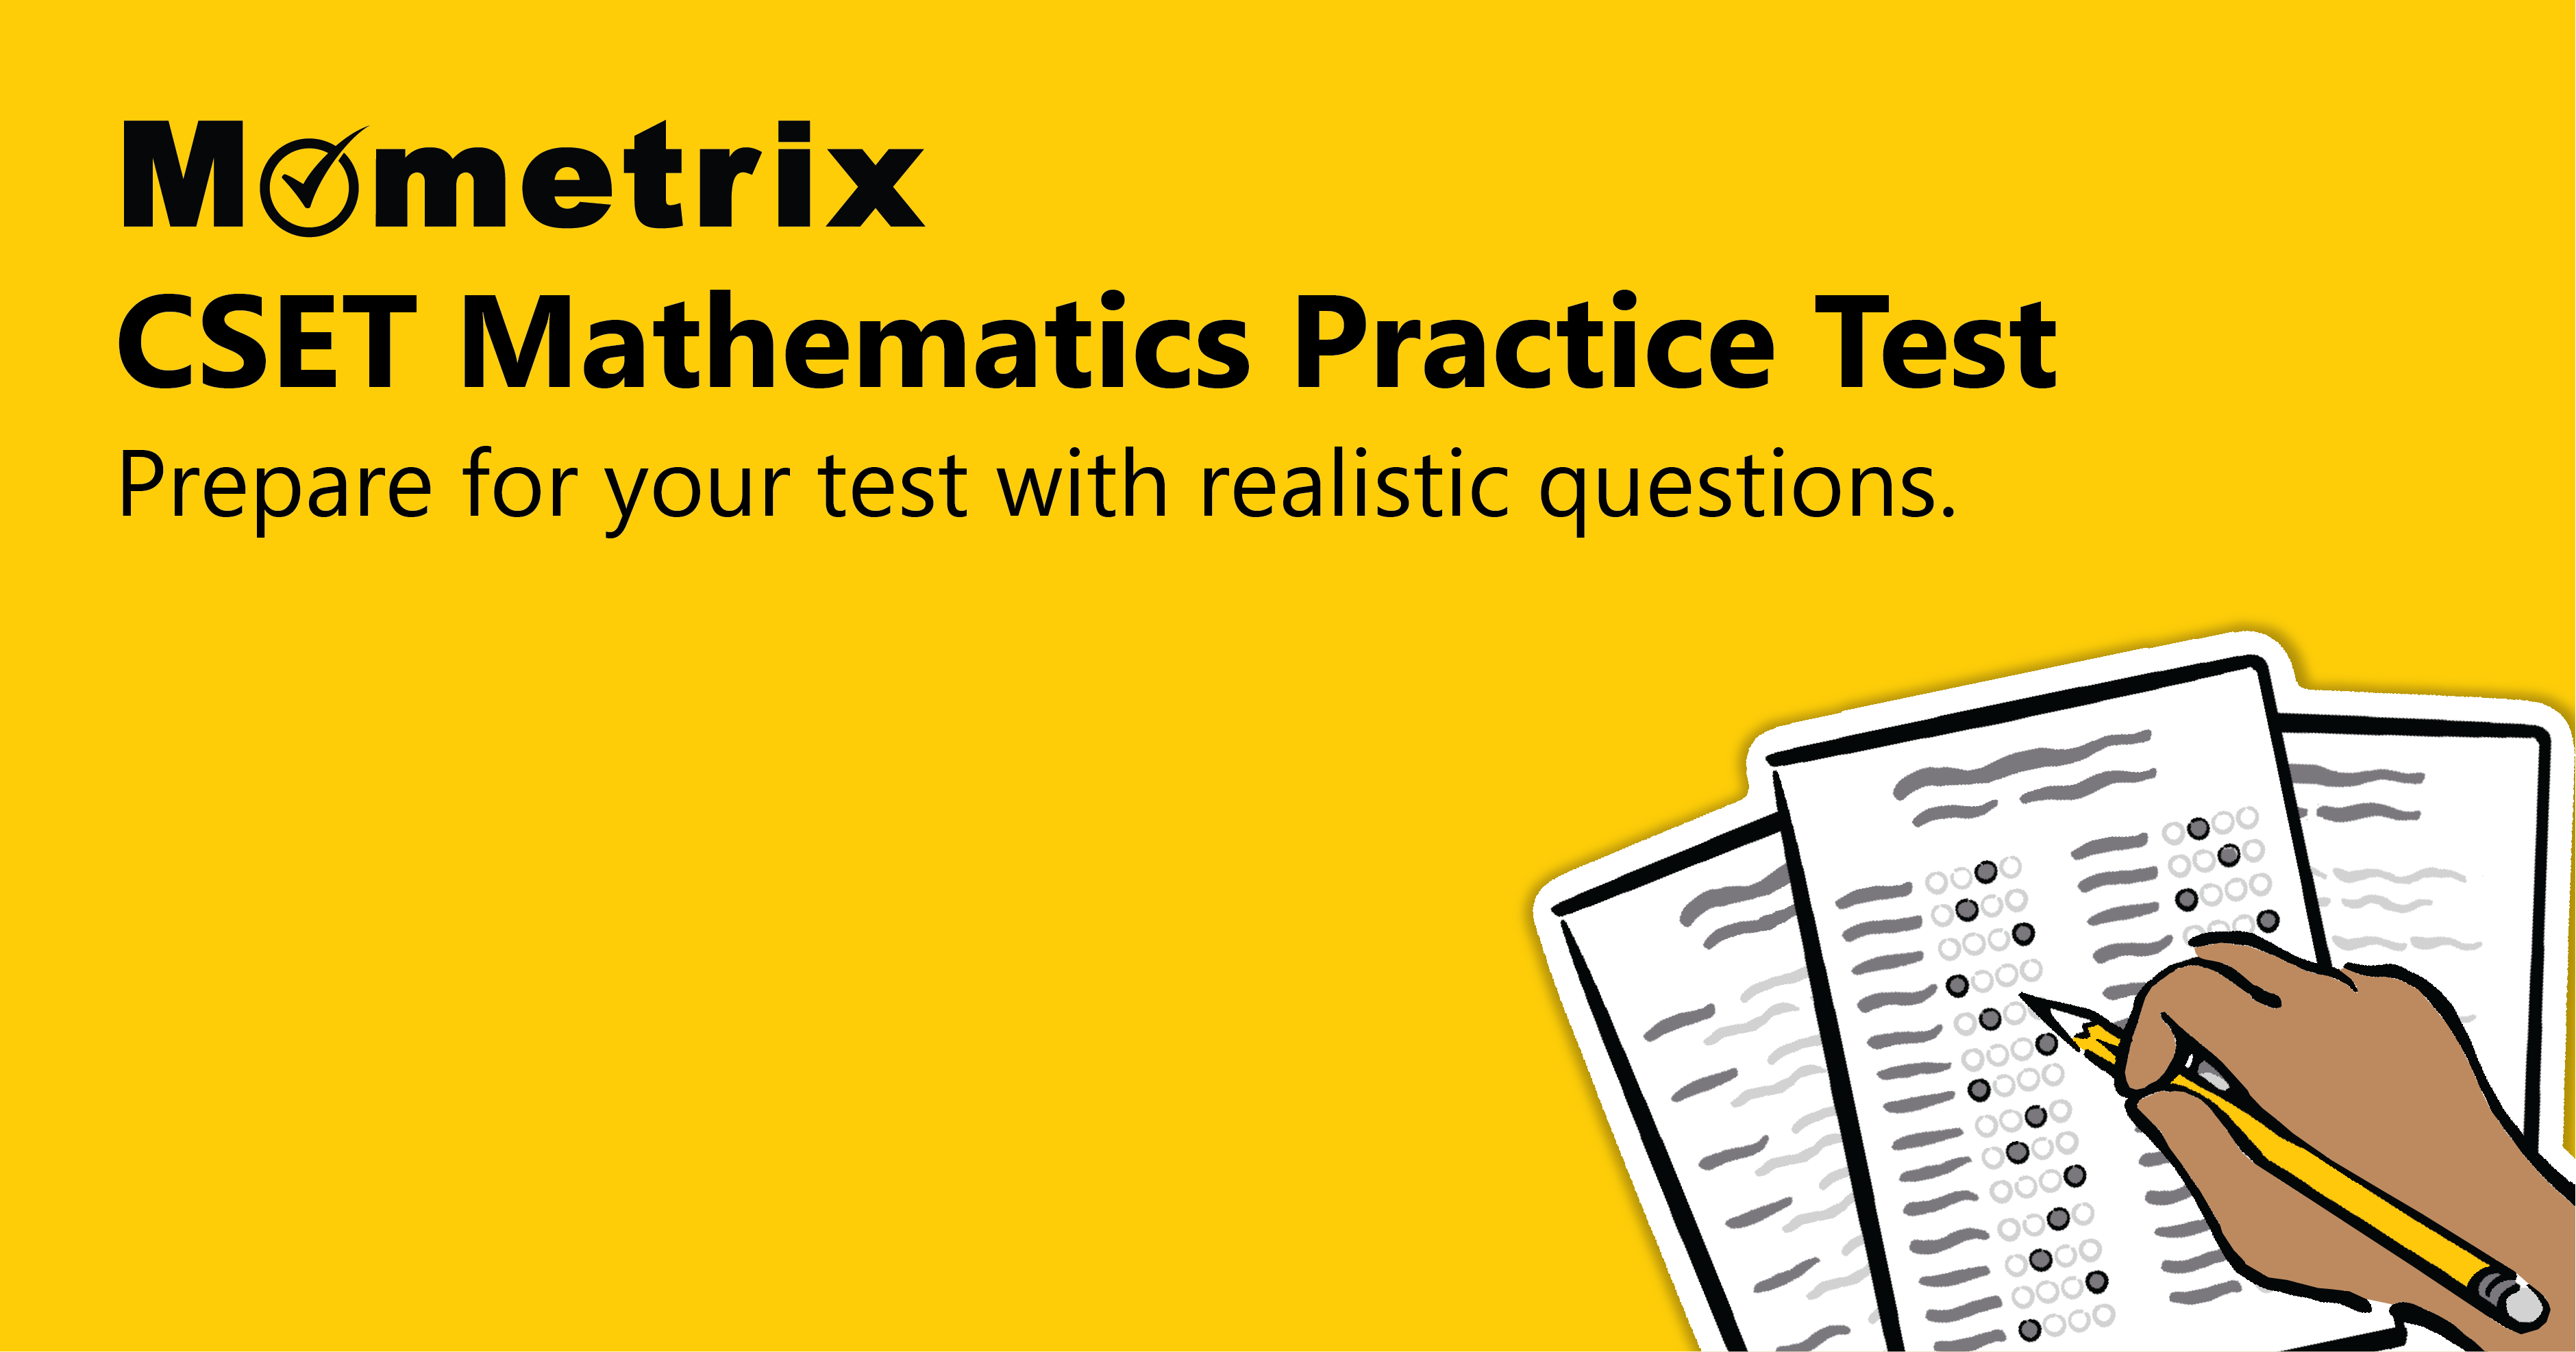 Illustration of a hand filling out multiple-choice answers on a test paper, alongside the text "Mometrix CSET Mathematics Practice Test: Prepare for your test with realistic questions.